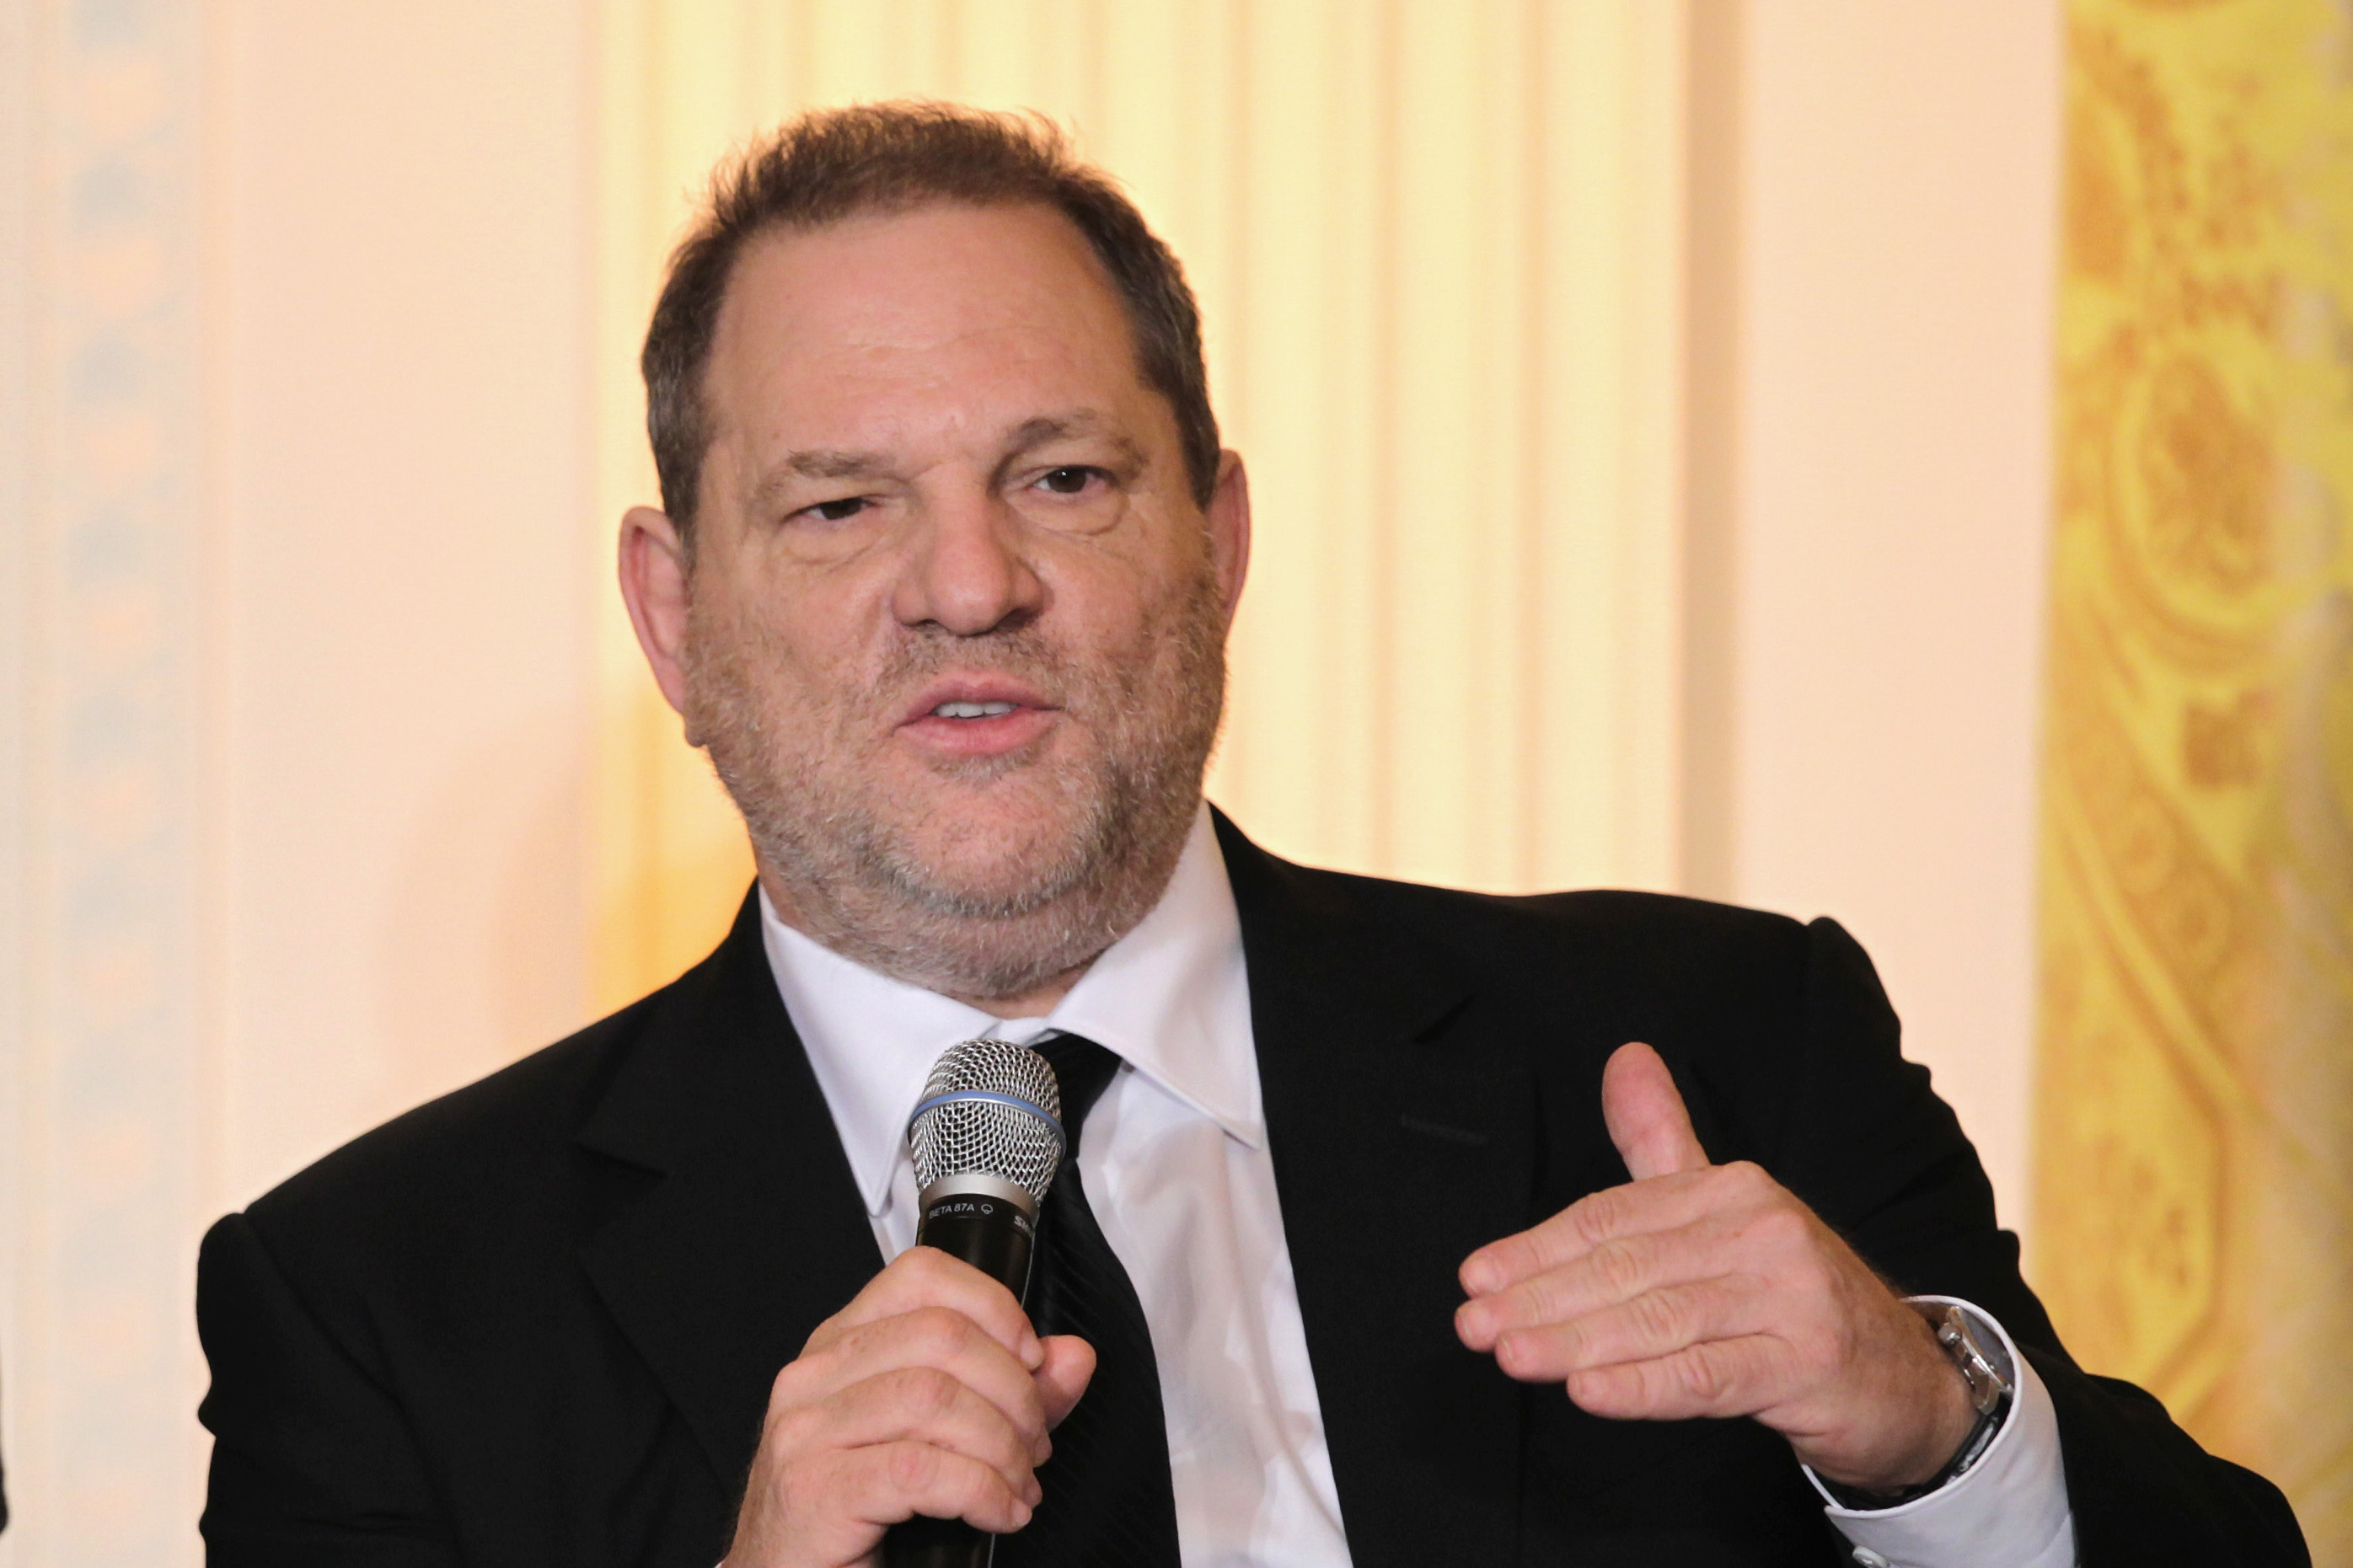 American film producer and former film studio executive Harvey Weinstein. (Alex Wong/Getty Images)